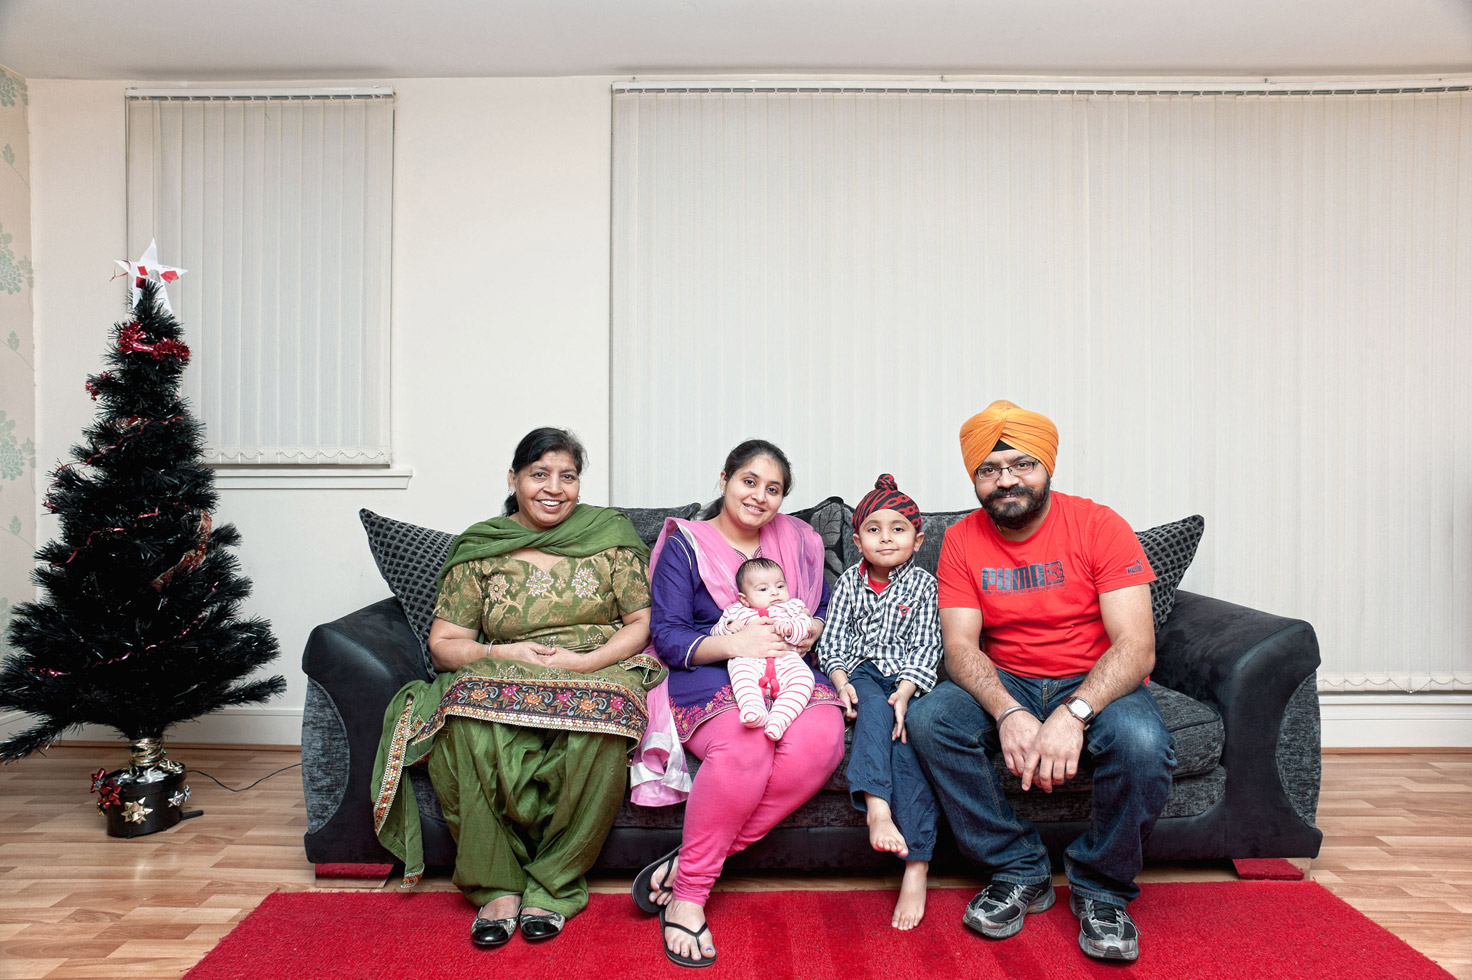 Meet Gurinder and Harpreet and family (Edinburgh, 2012) Sikh communities in Scotland have a long history, stretching back to the 19th century when the first families arrived from India. Scottish Sikhs have their own tartan and are often to be found wearing kilts on special occasions.